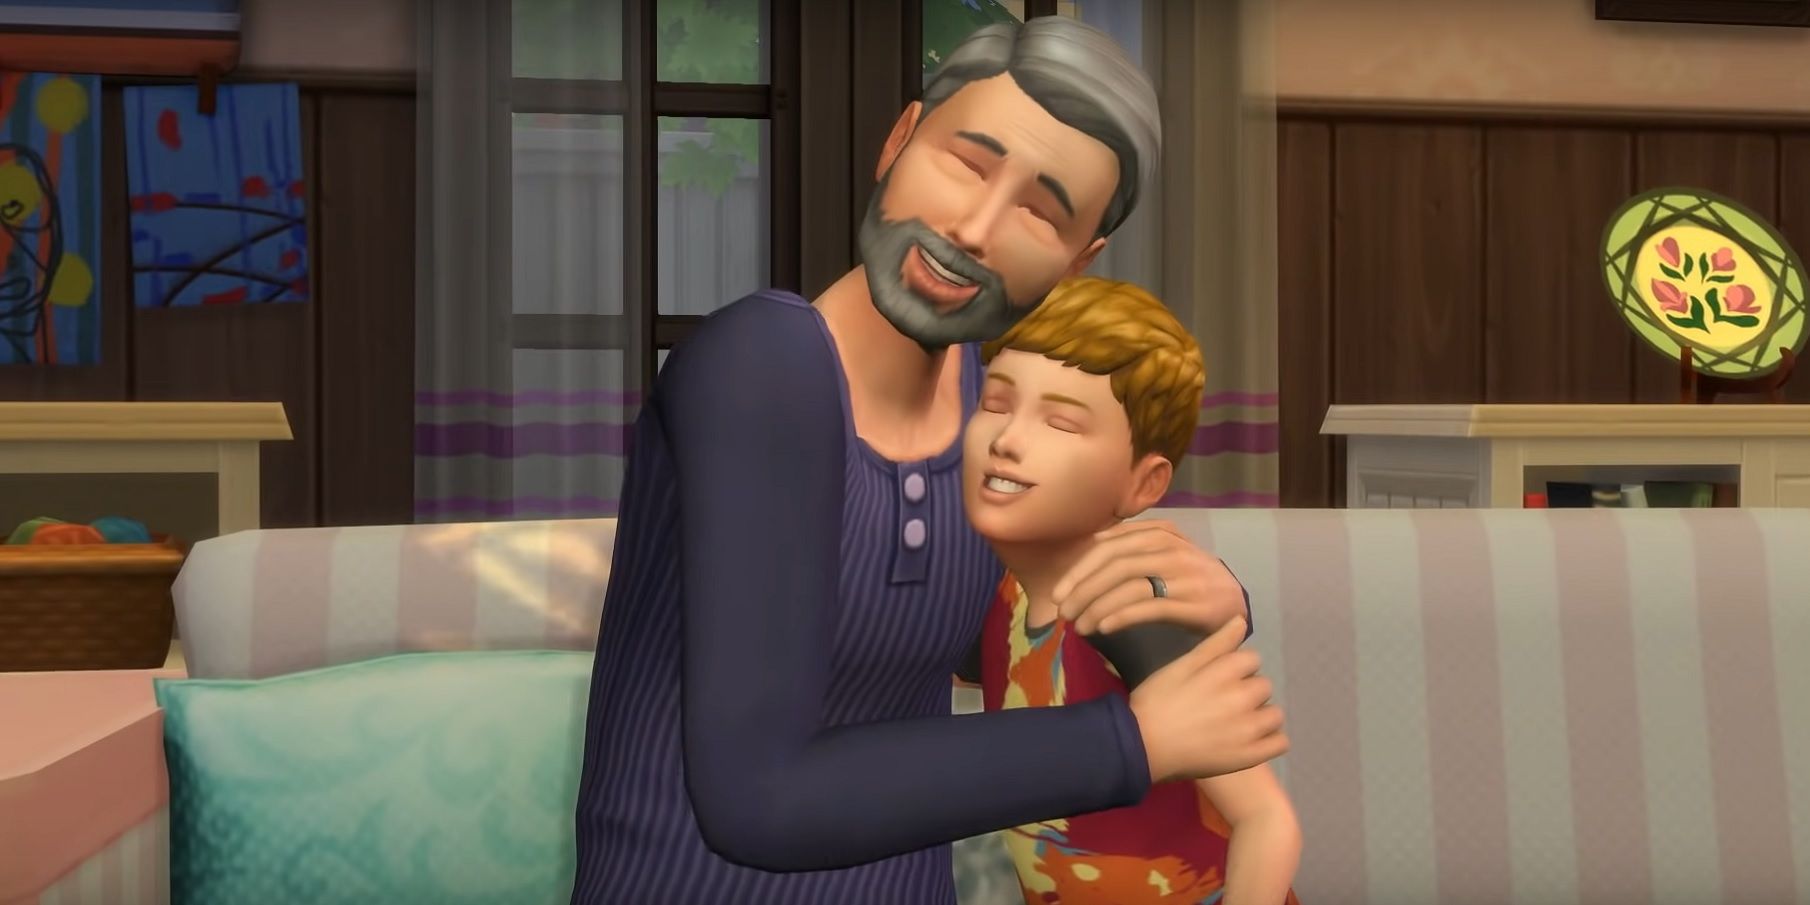 A Sims 4 elder hugging his grandson while they sit on a couch.